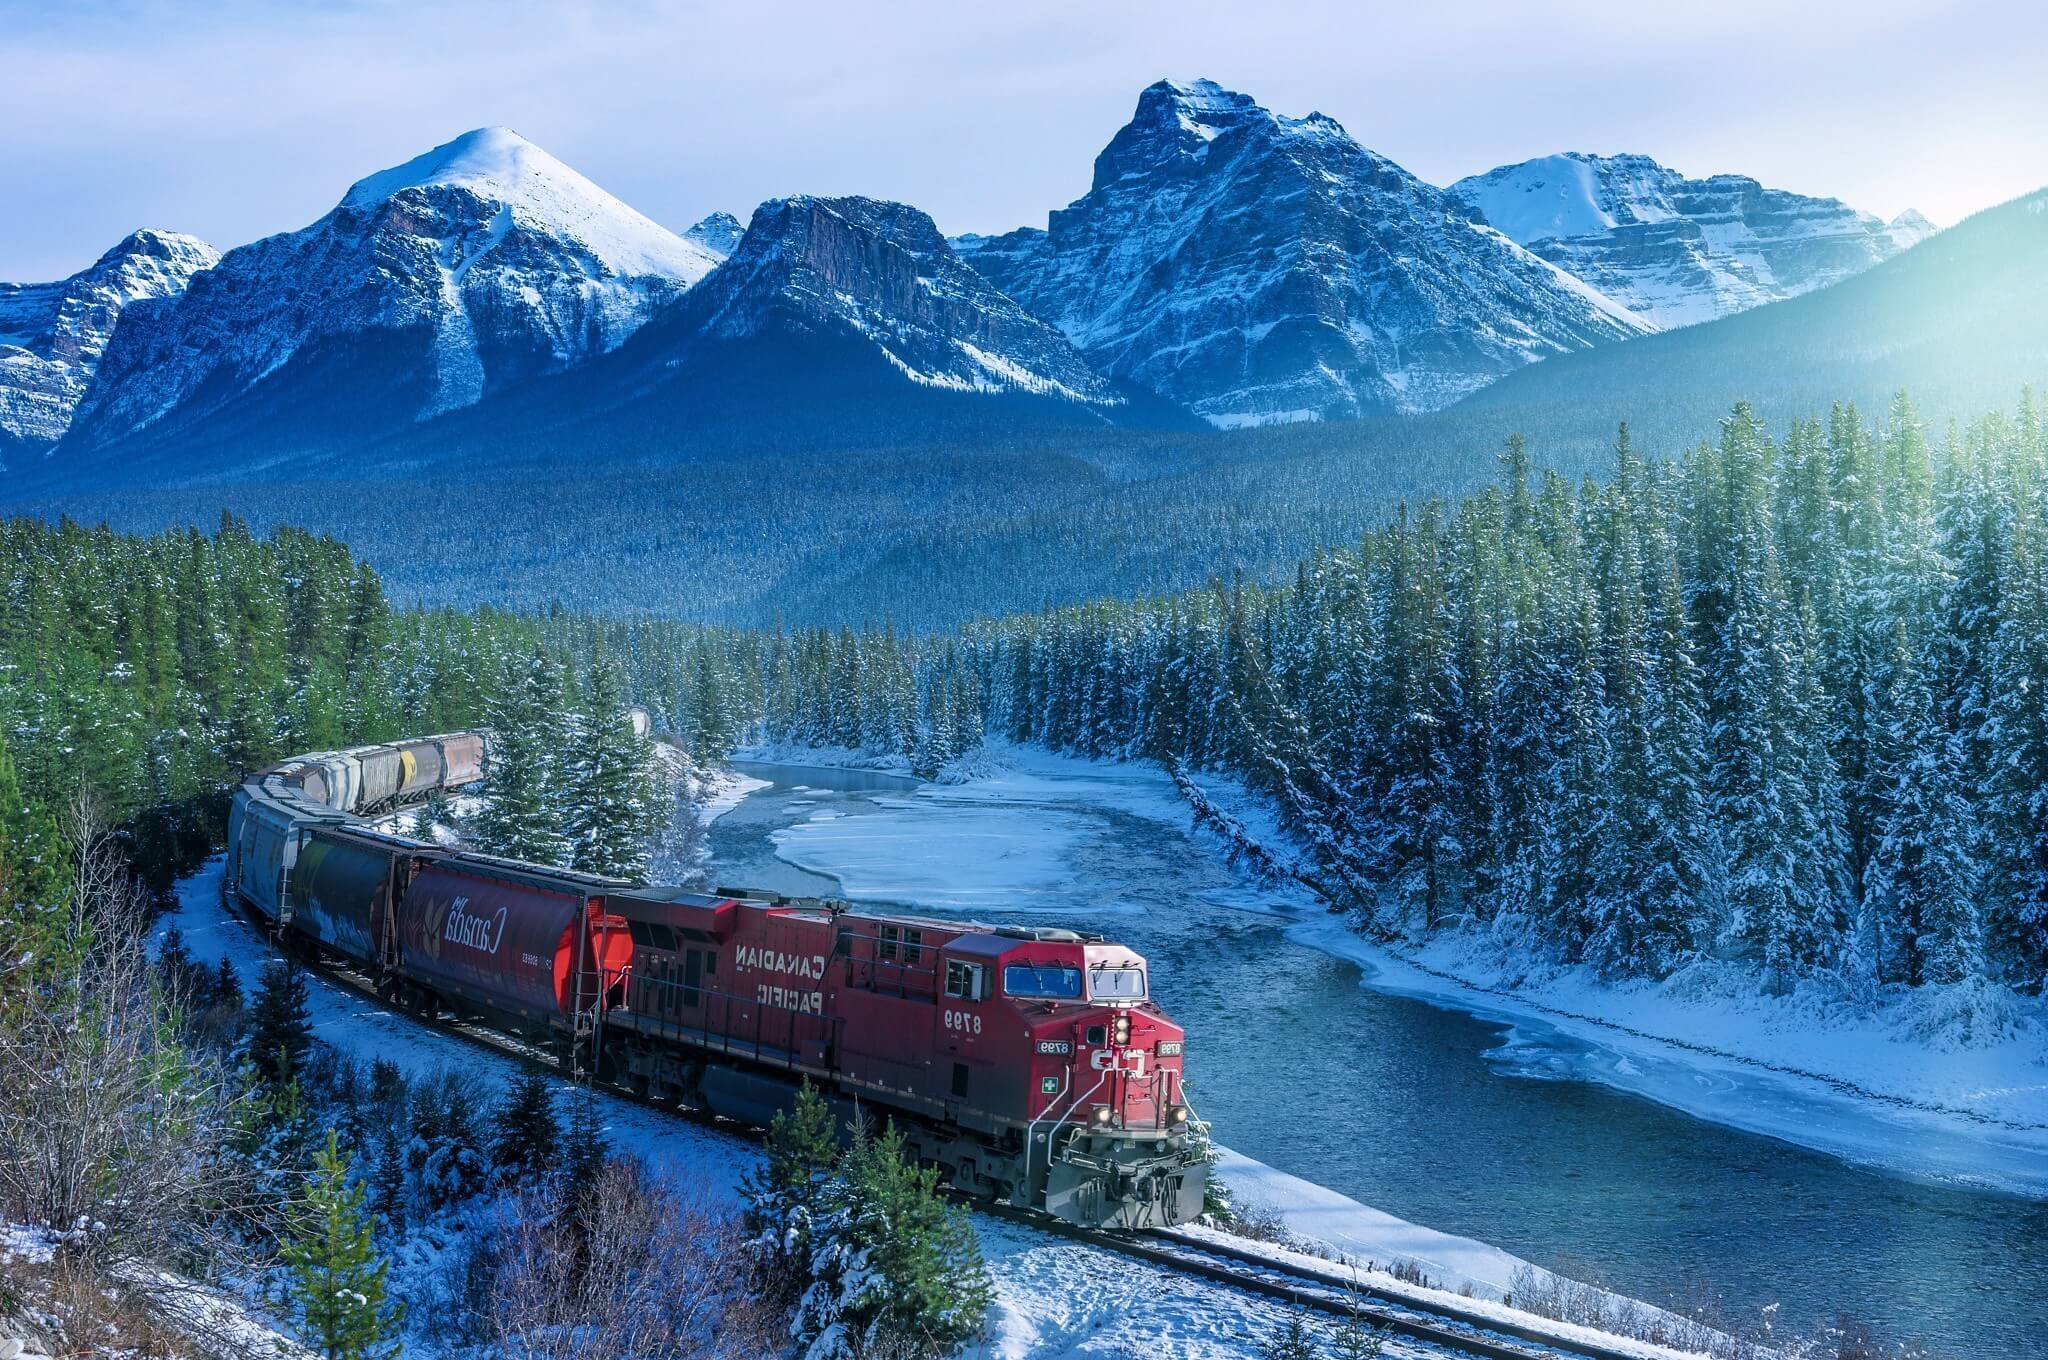 Winter Canada 4 Star Holiday Travel & Tour Package